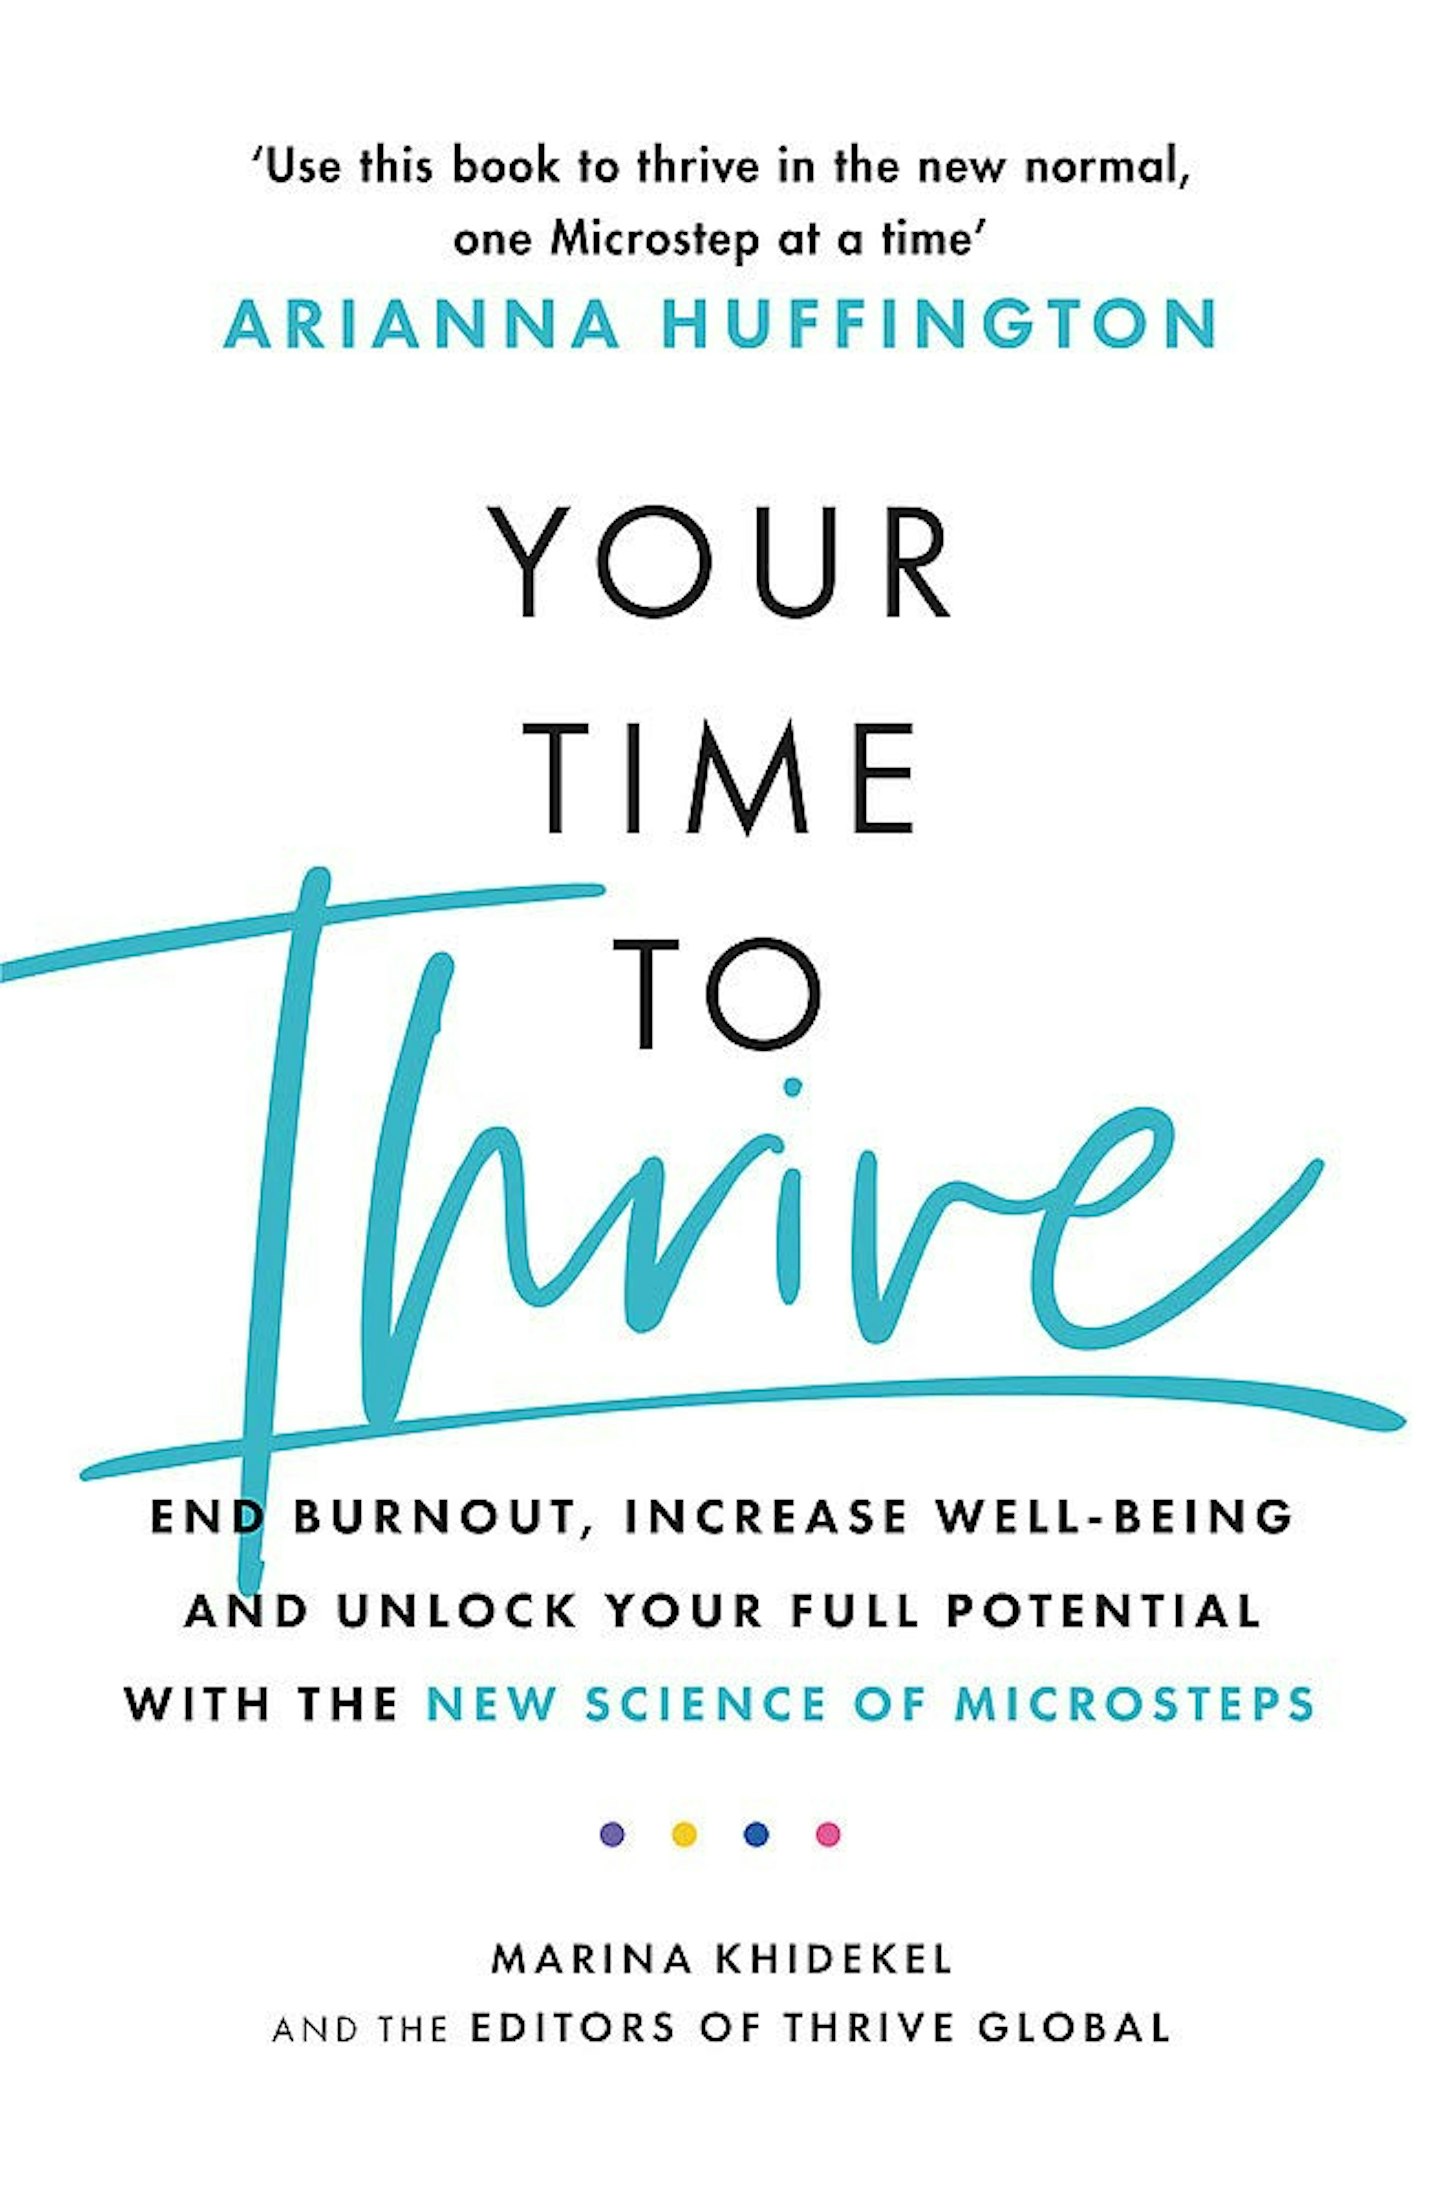 Your Time to Thrive by Marina Khidekel